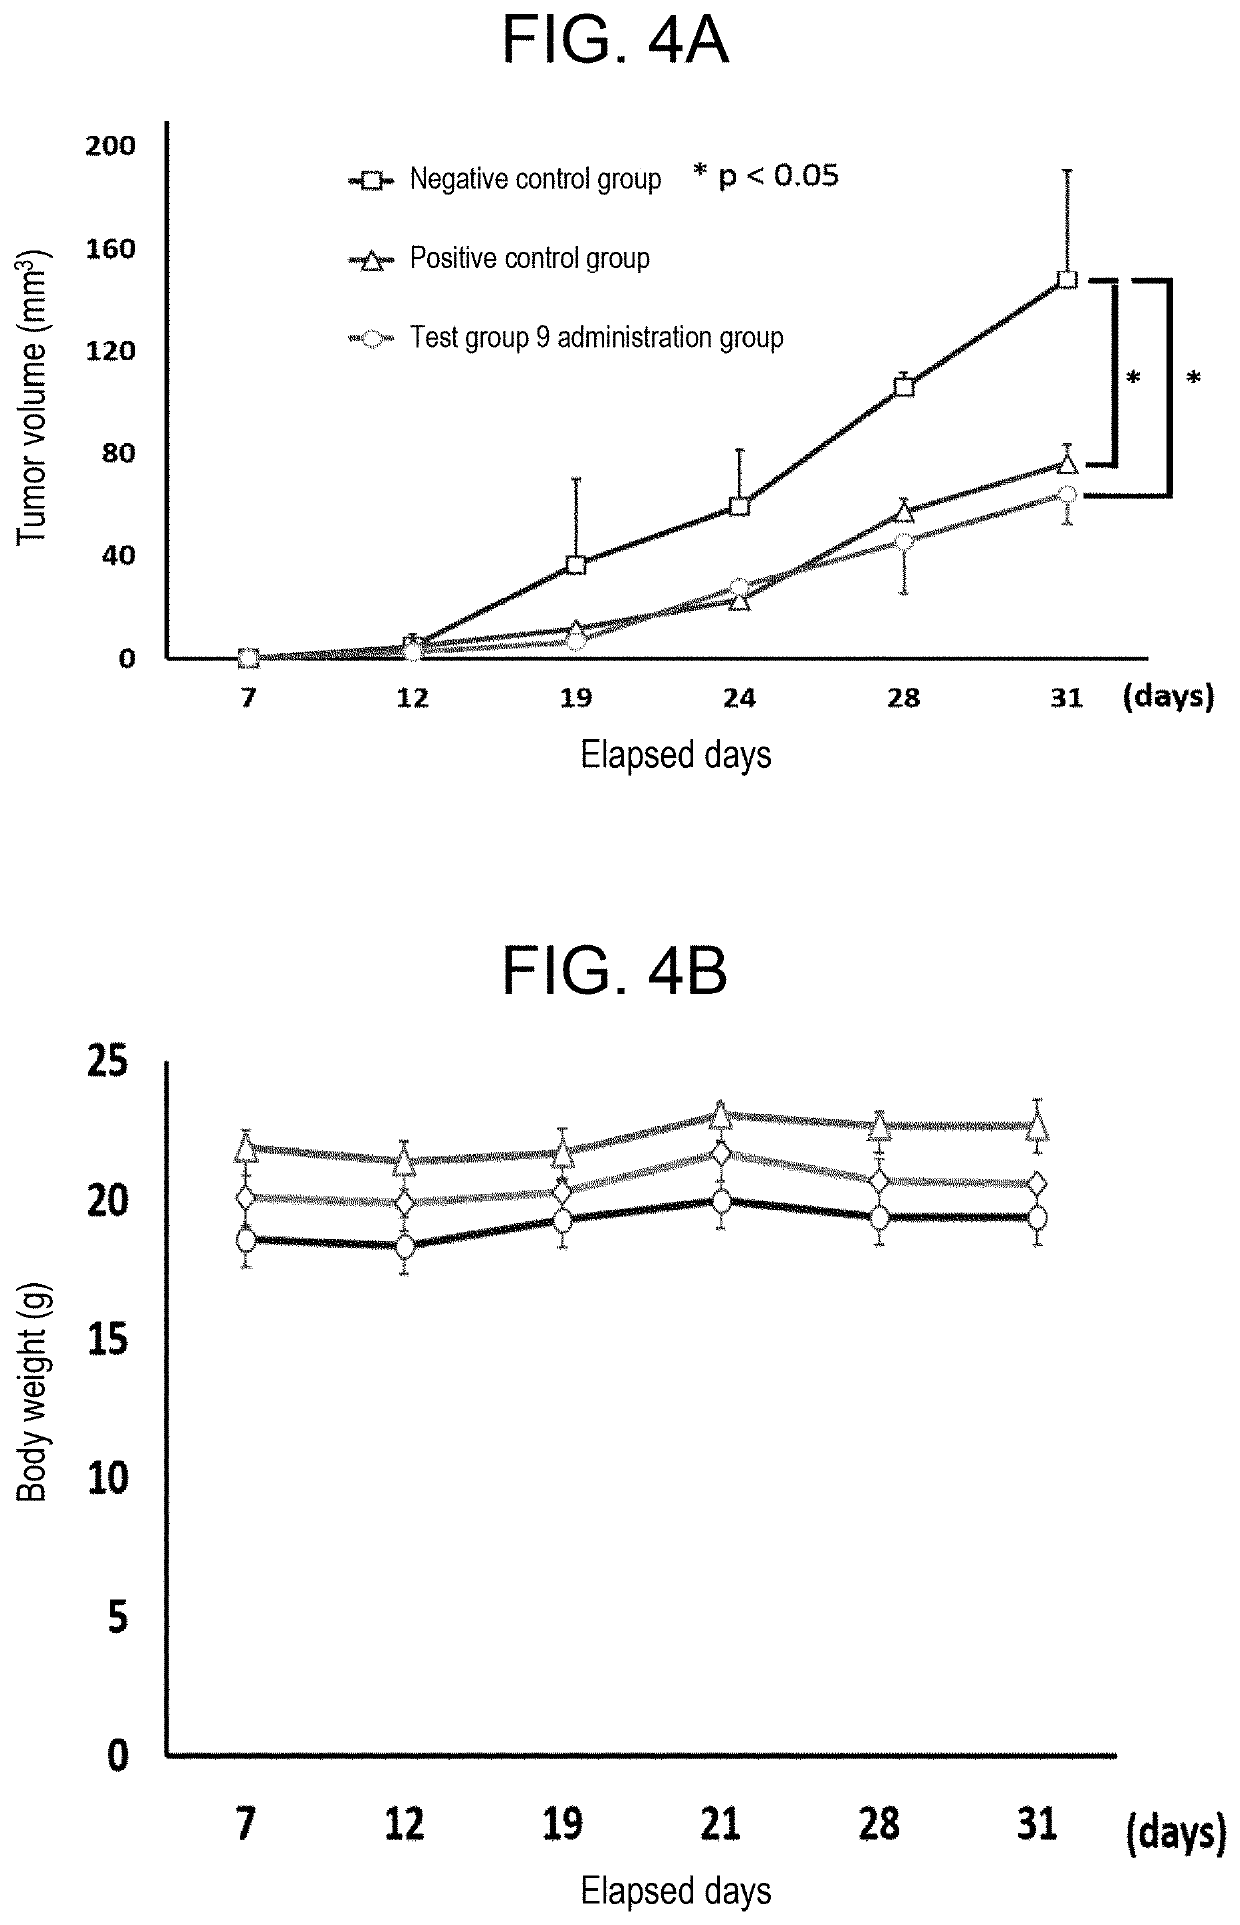 Pharmaceutical composition comprising iron chelator exhibiting antitumor activity, antibacterial activity and/or antivirus activity, and having reduced side effects